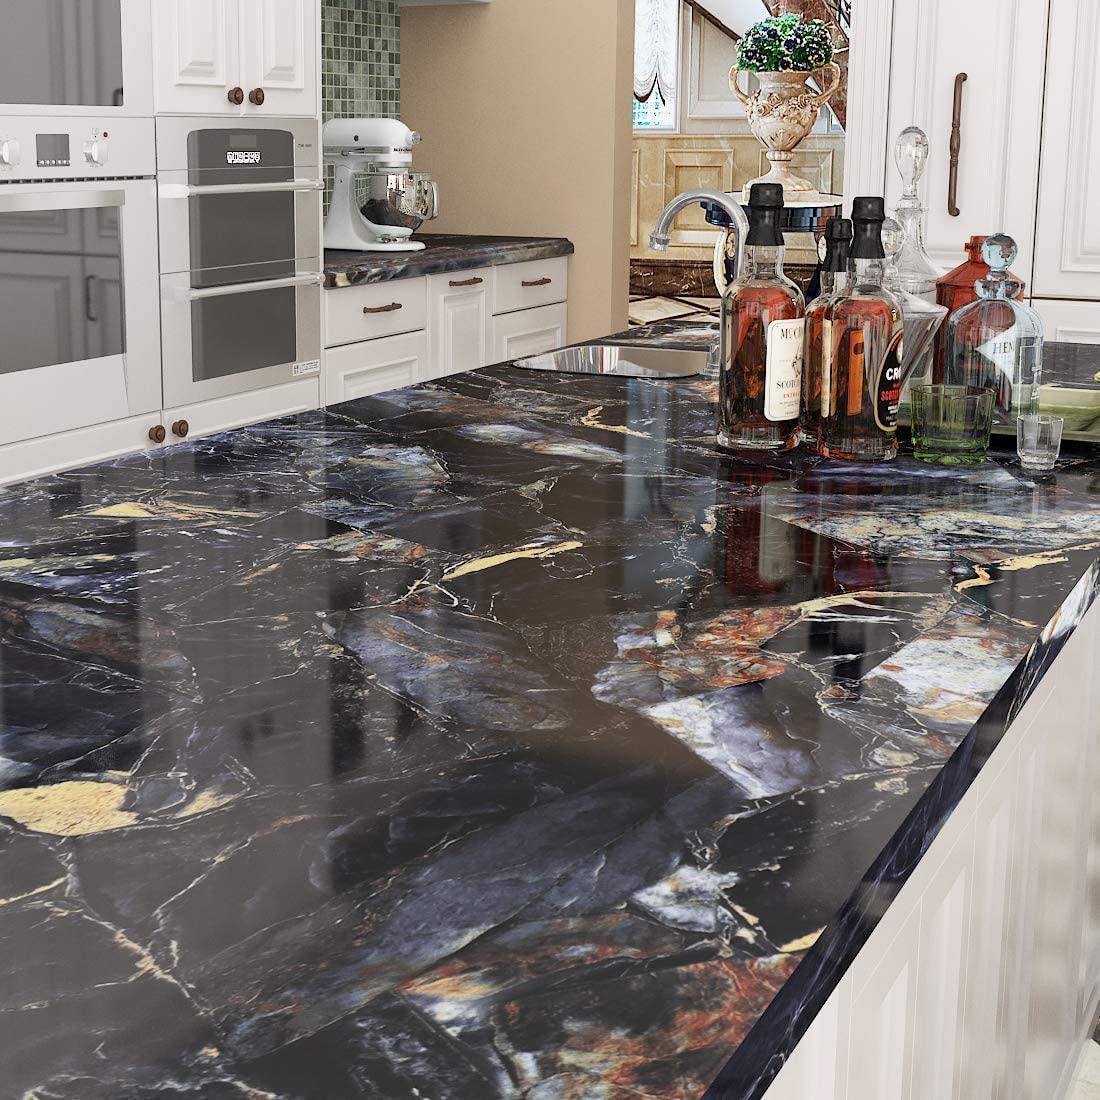 Livelynine, Livelynine 197 X 24 Inch Wide Contact Paper for Countertops Waterproof Dresser Cover Top Black and Gold Wallpaper Marble Peel and Stick Countertop for Kitchen Counter Laminate Sheets Table Sticker